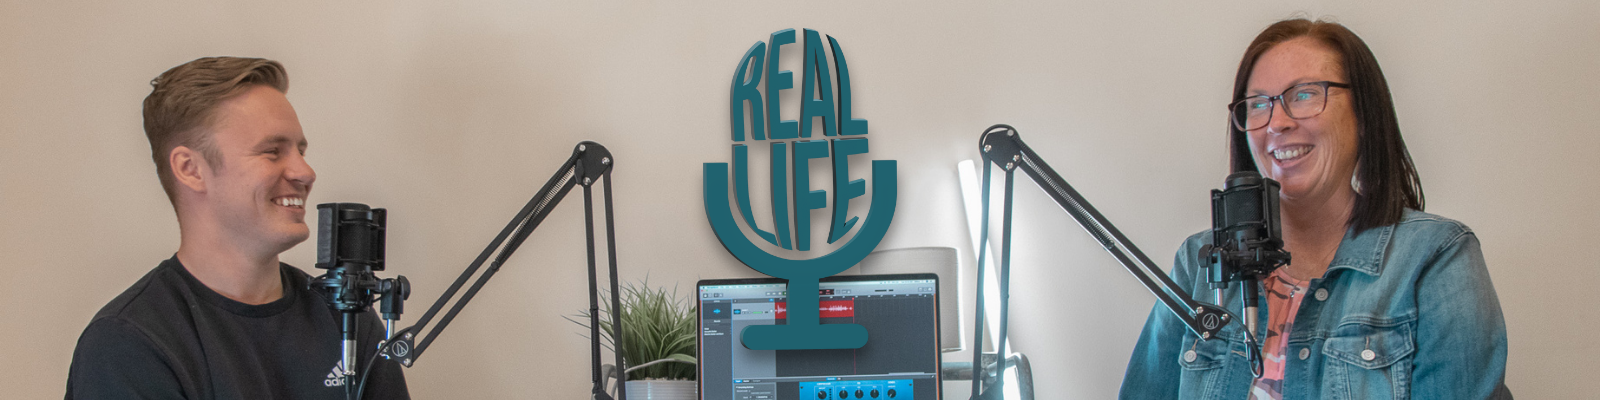 The Real Life Podcast - Conversations from Life Foursquare